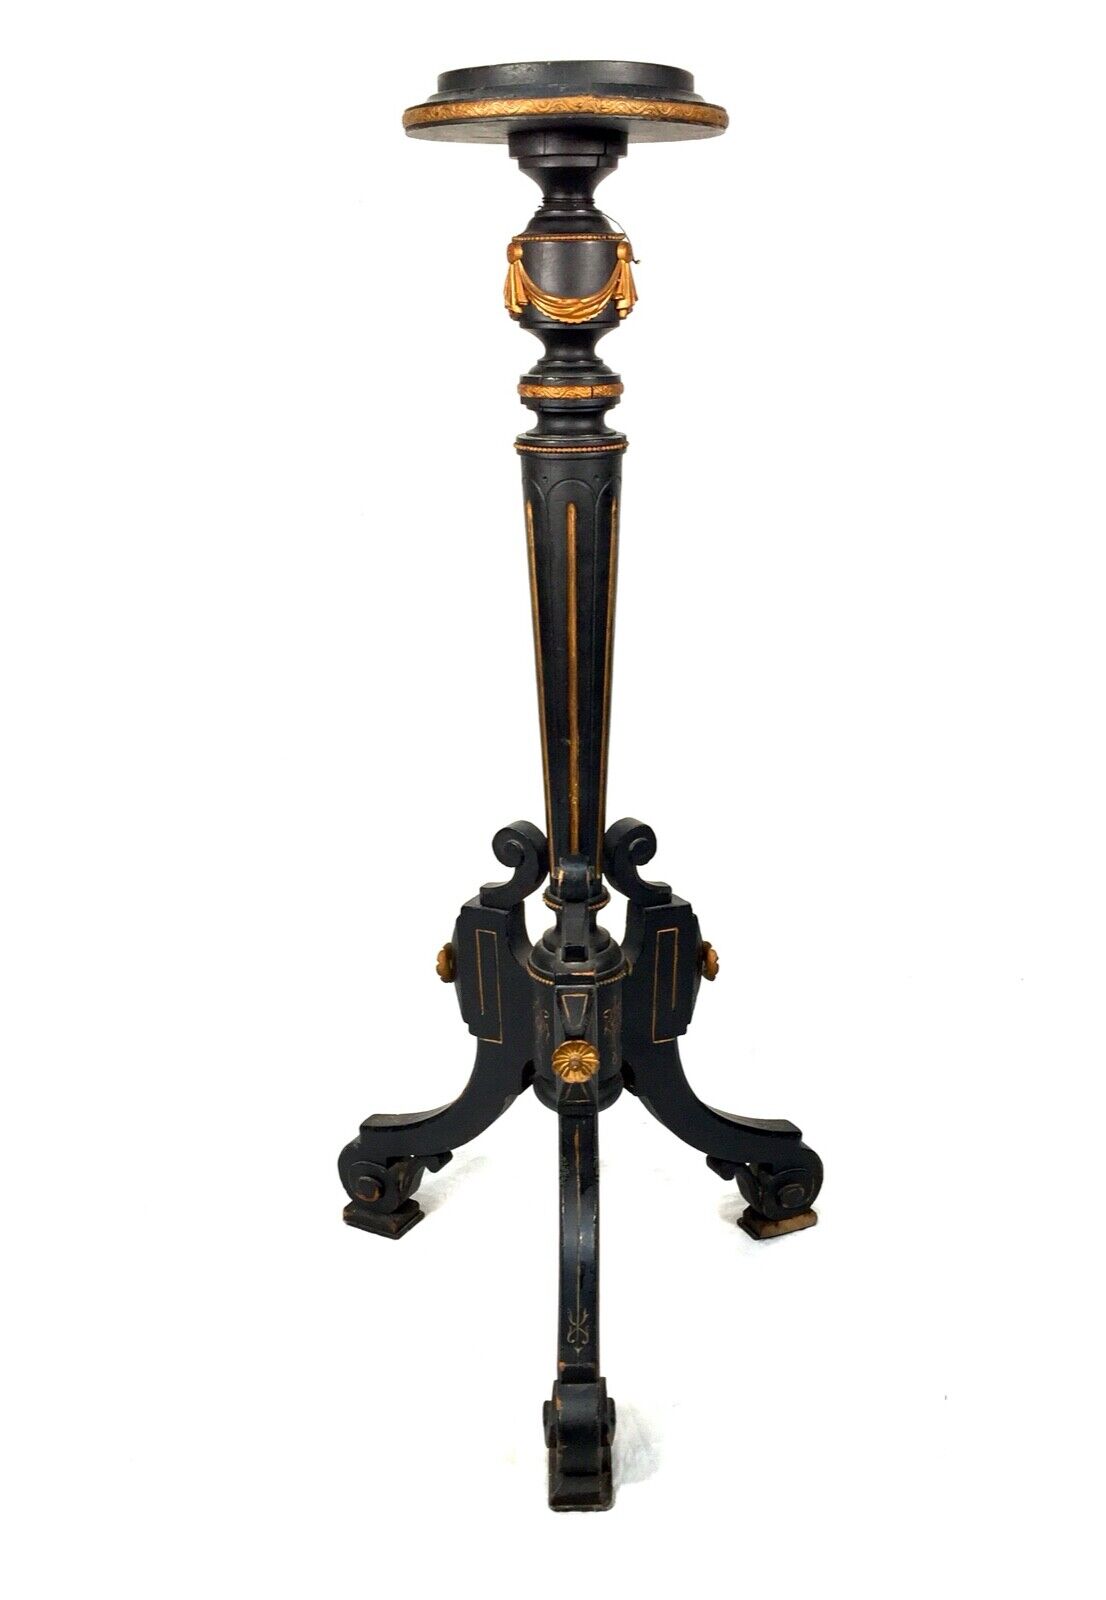 Antique Wooden Ebony Plant Pot or Sculpture Stand / French / c.1900